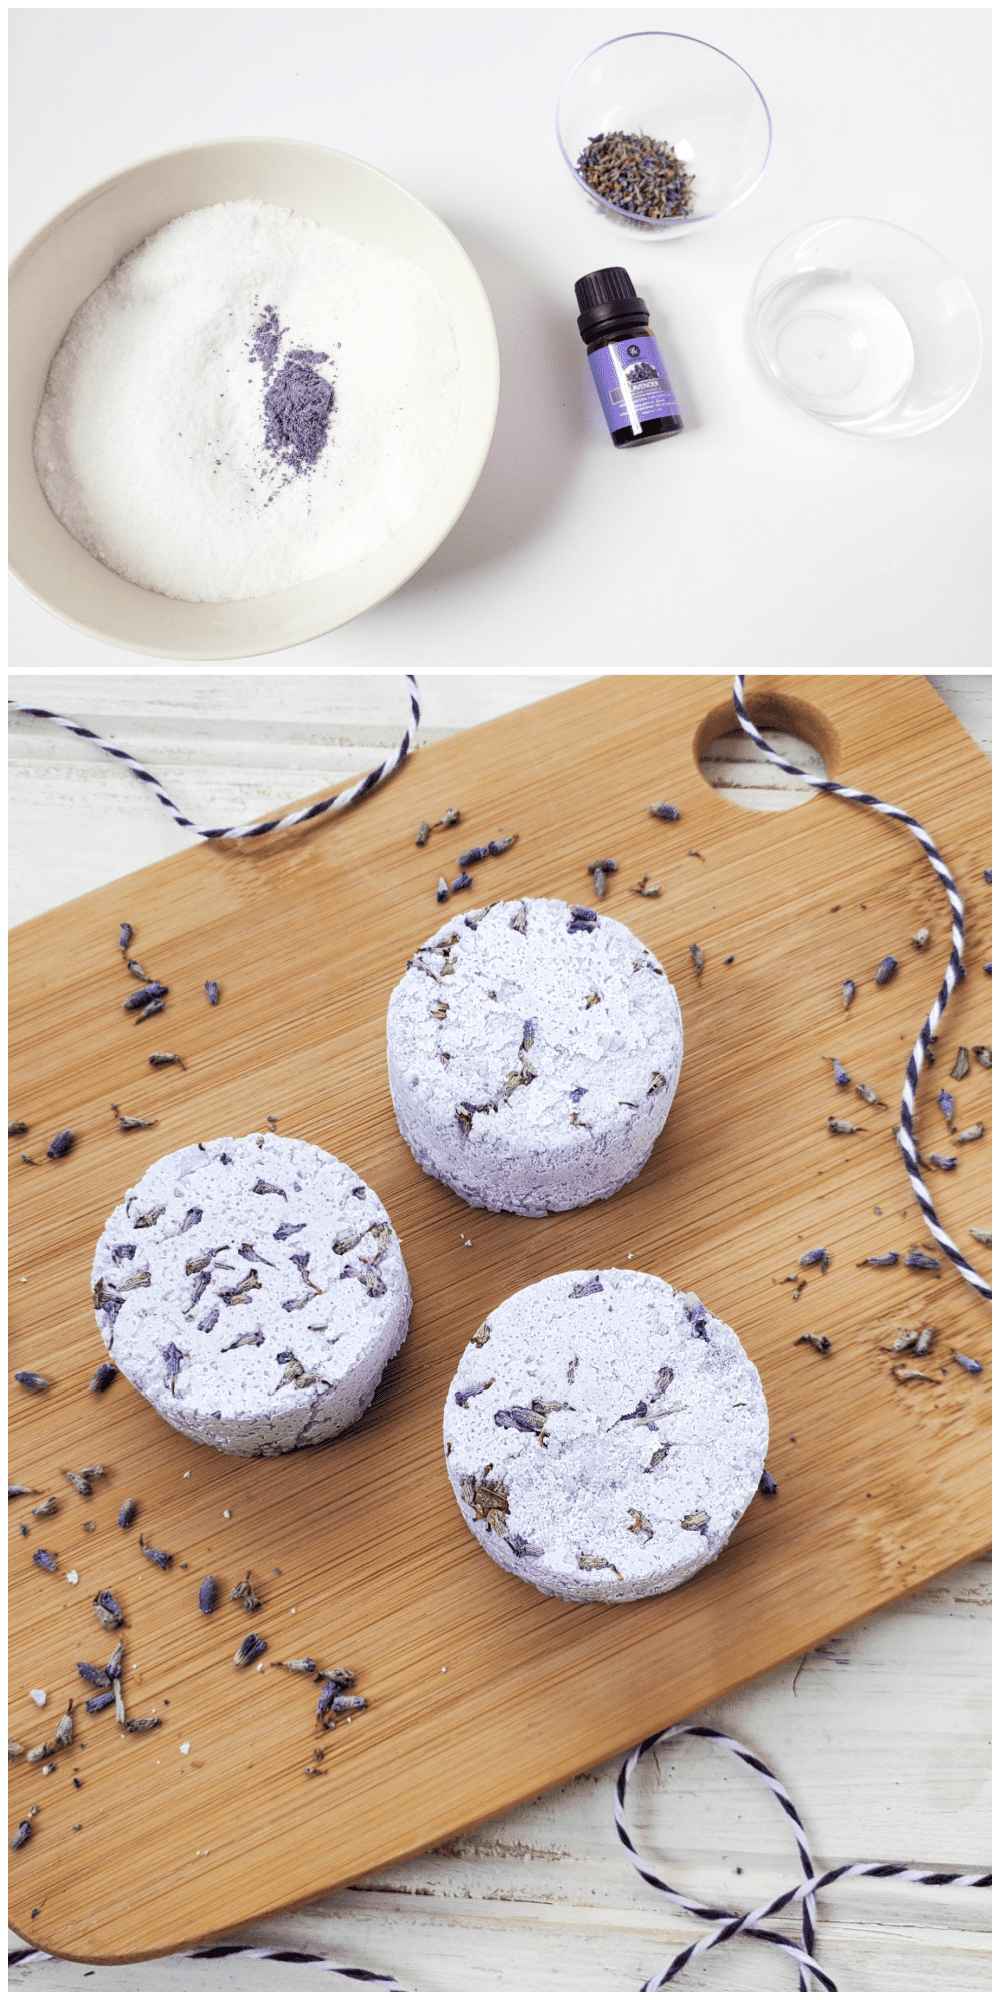 Relax and allow the stress of your day to leave your body as you shower with these Lavender Scented Shower Steamers. They are easy to make and make beautiful gifts for friends. via @jugglingactmama